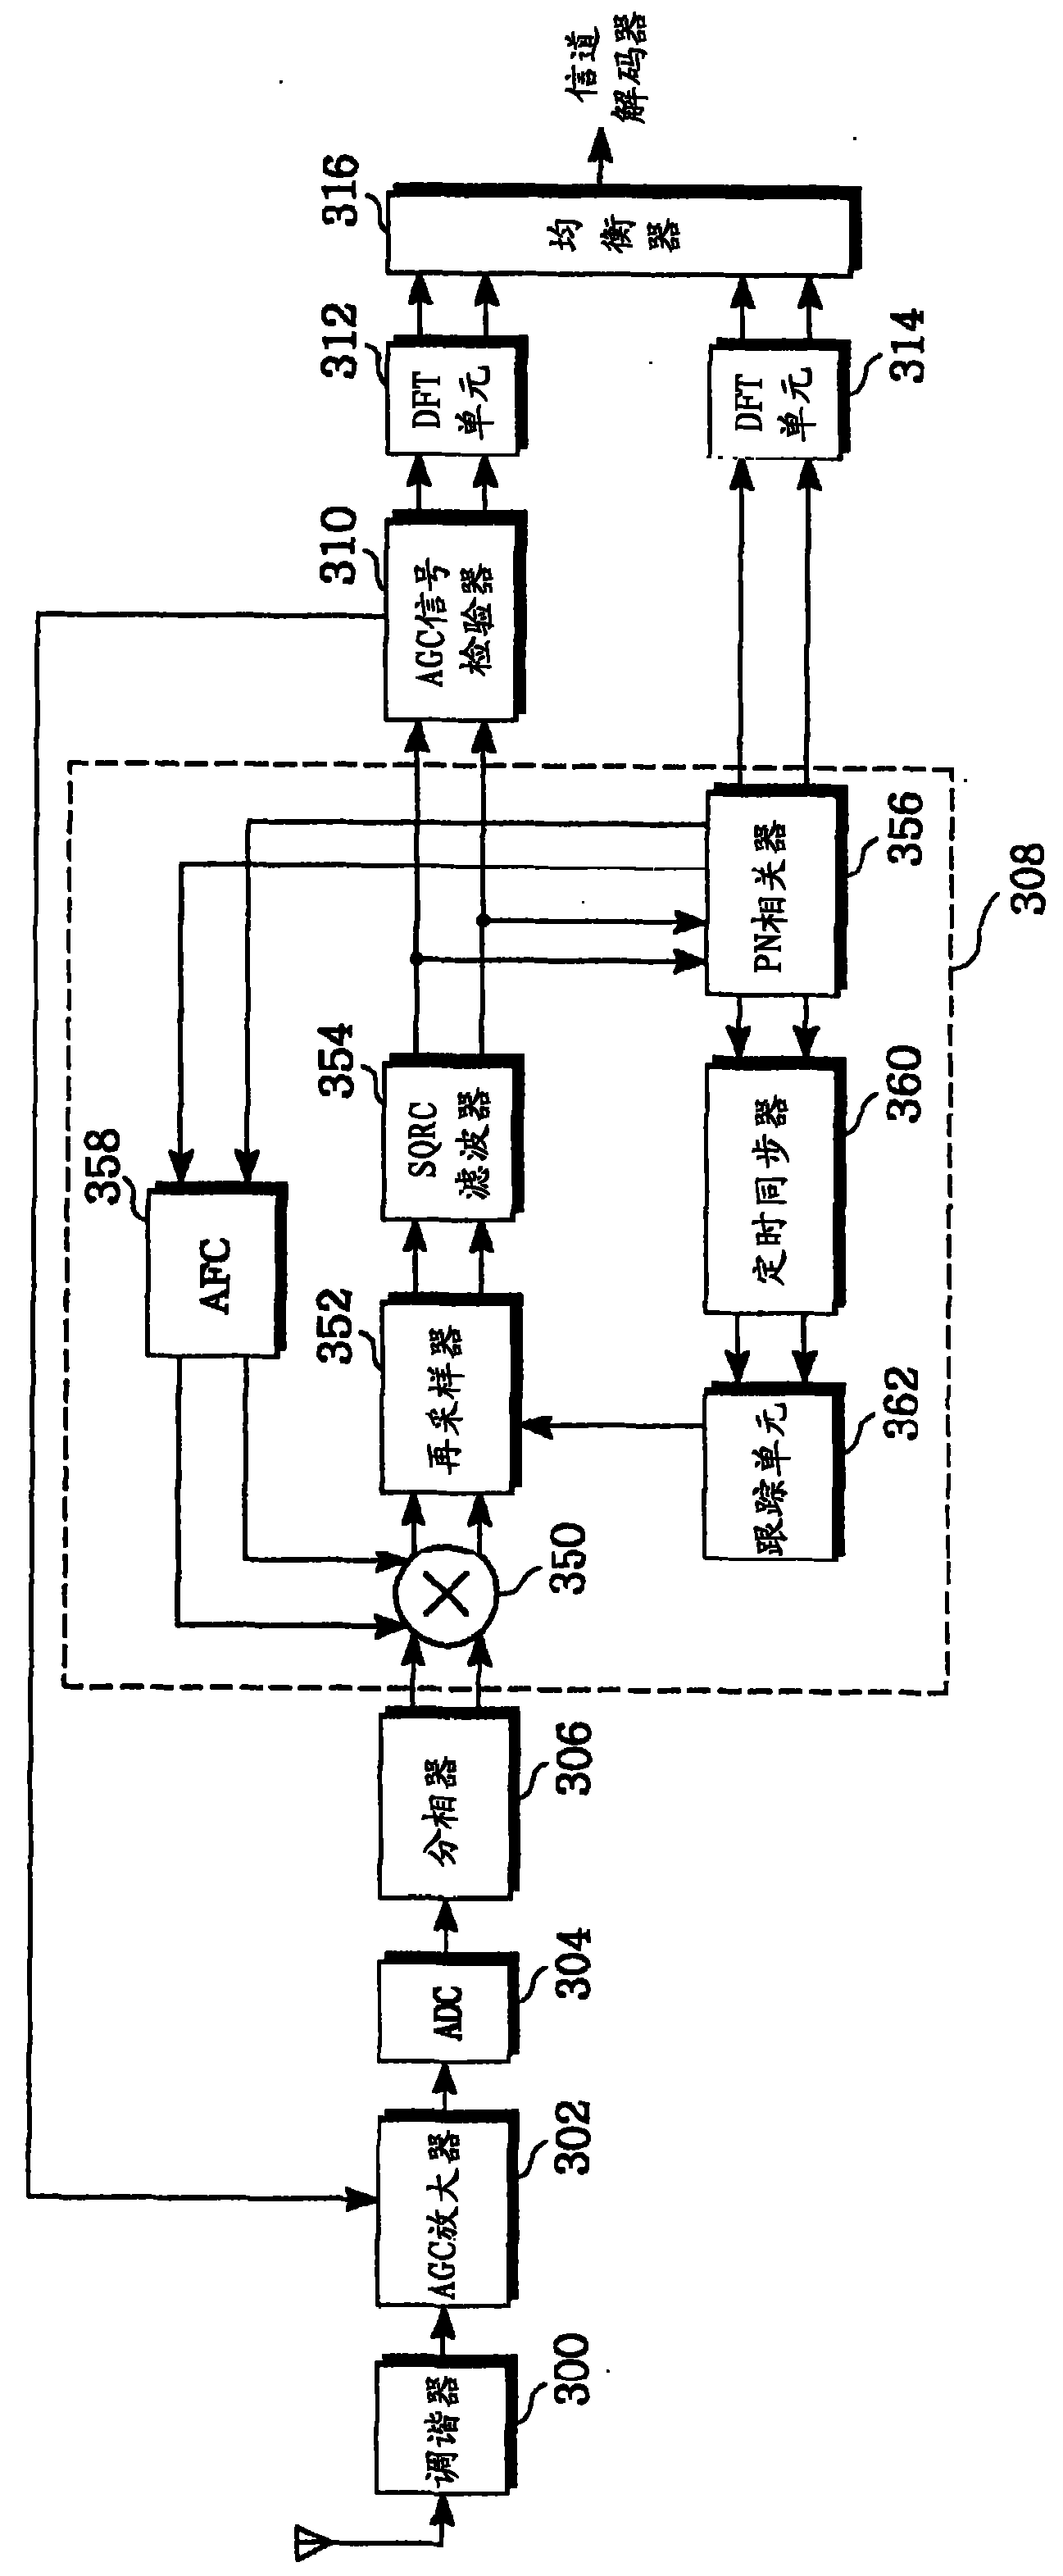 Method and apparatus for automatic gain control